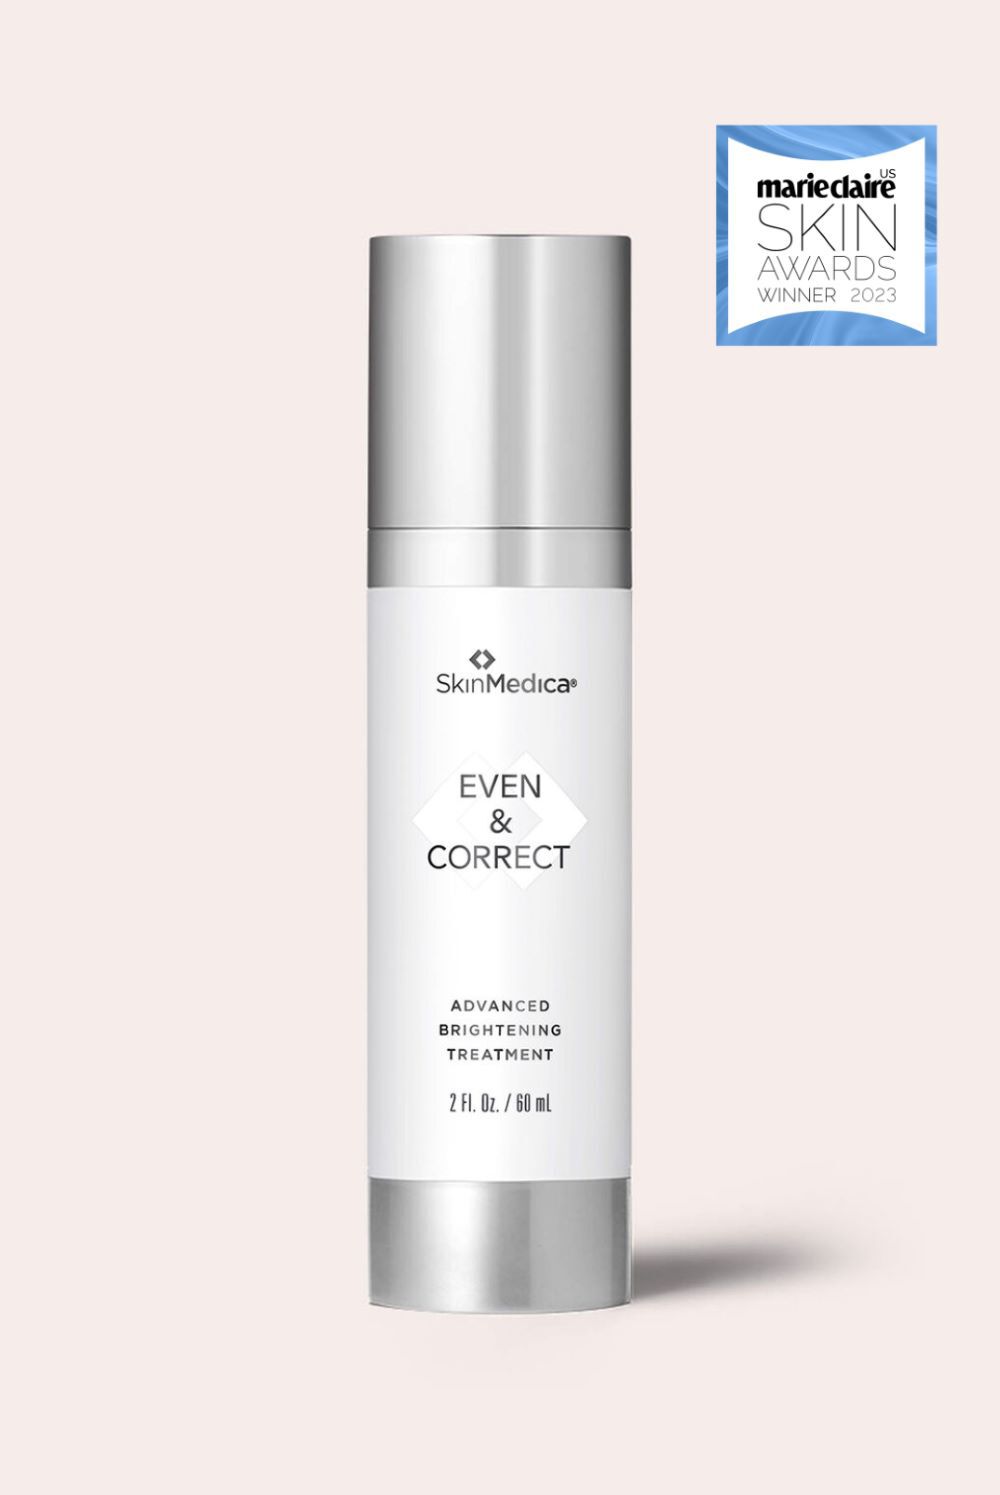 Discover Your Beauty World of SkinMedica